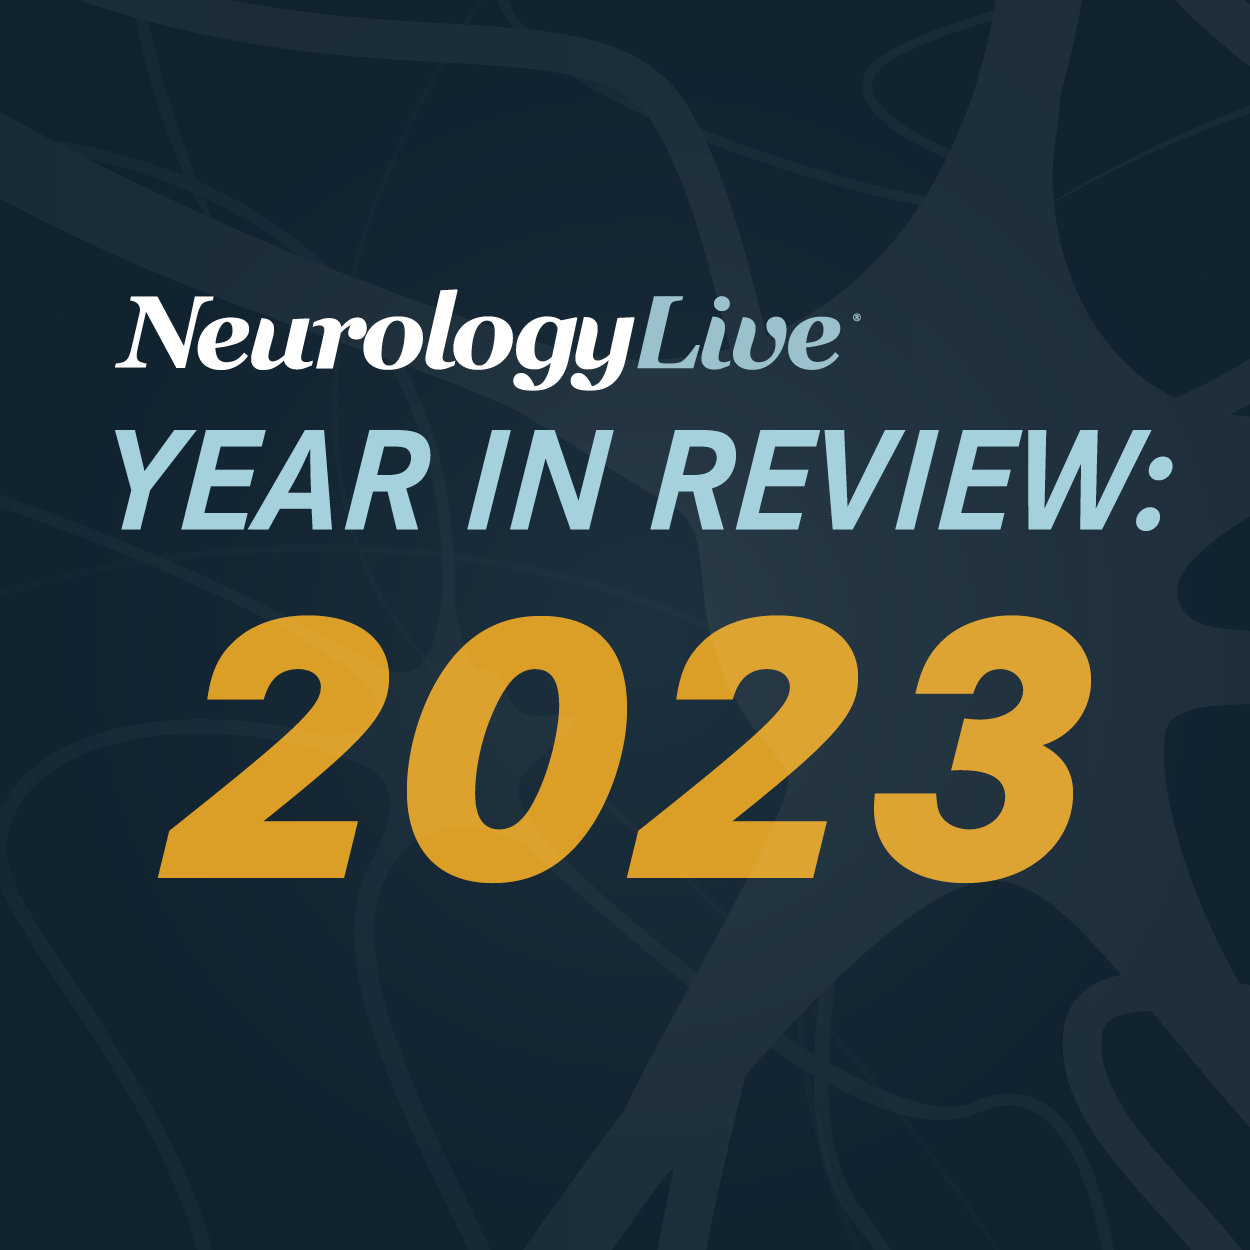 NeurologyLive® Year in Review 2023: Top Stories in Epilepsy and Seizure Disorders